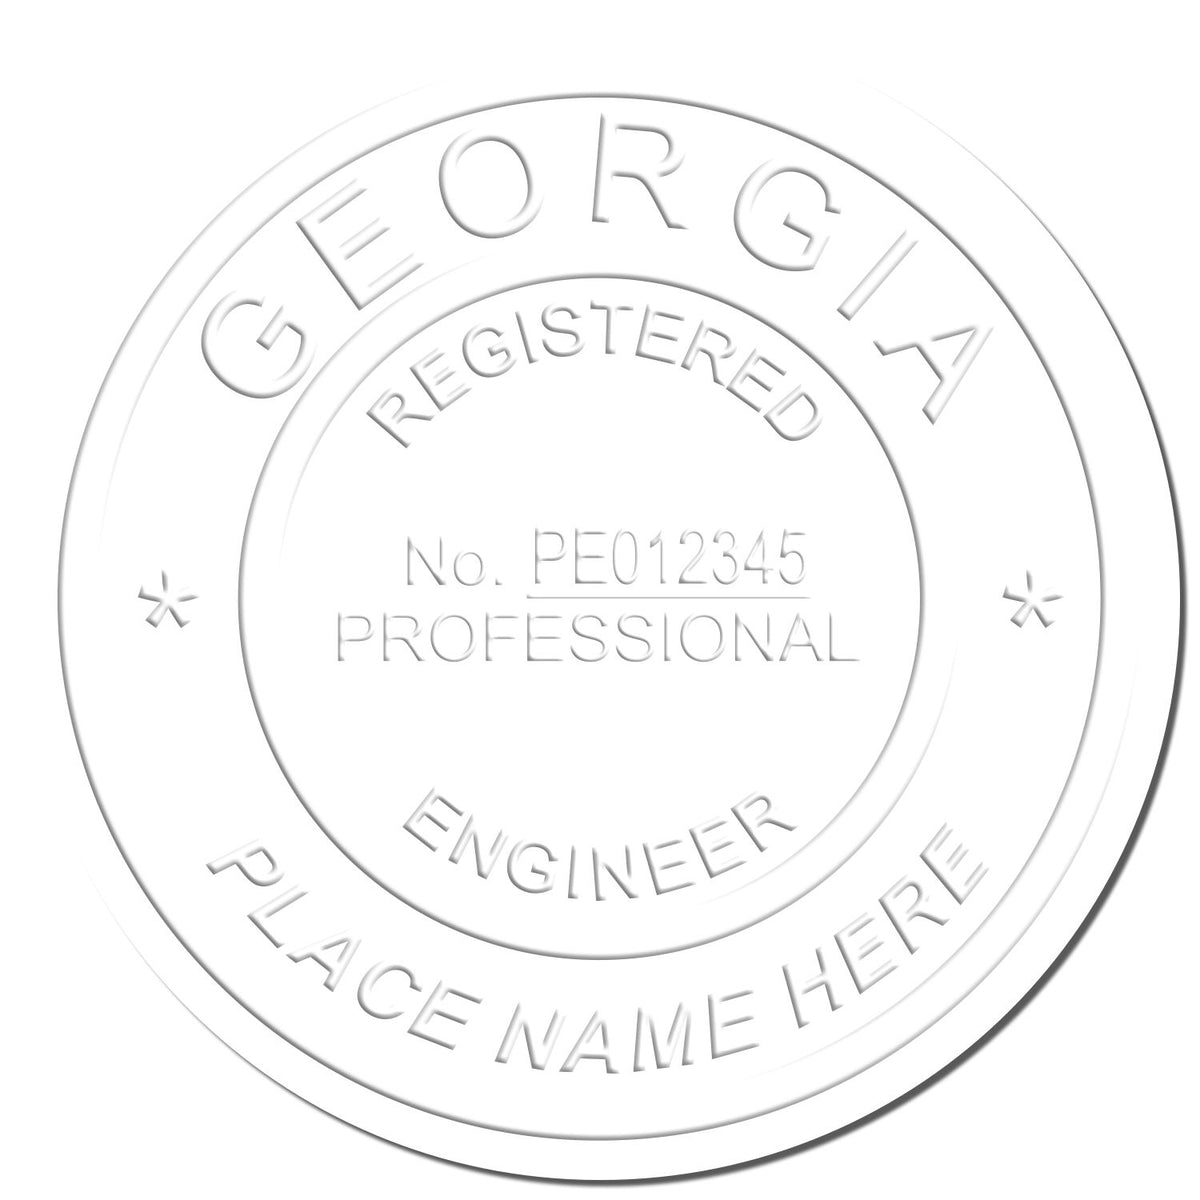 The Long Reach Georgia PE Seal stamp impression comes to life with a crisp, detailed photo on paper - showcasing true professional quality.